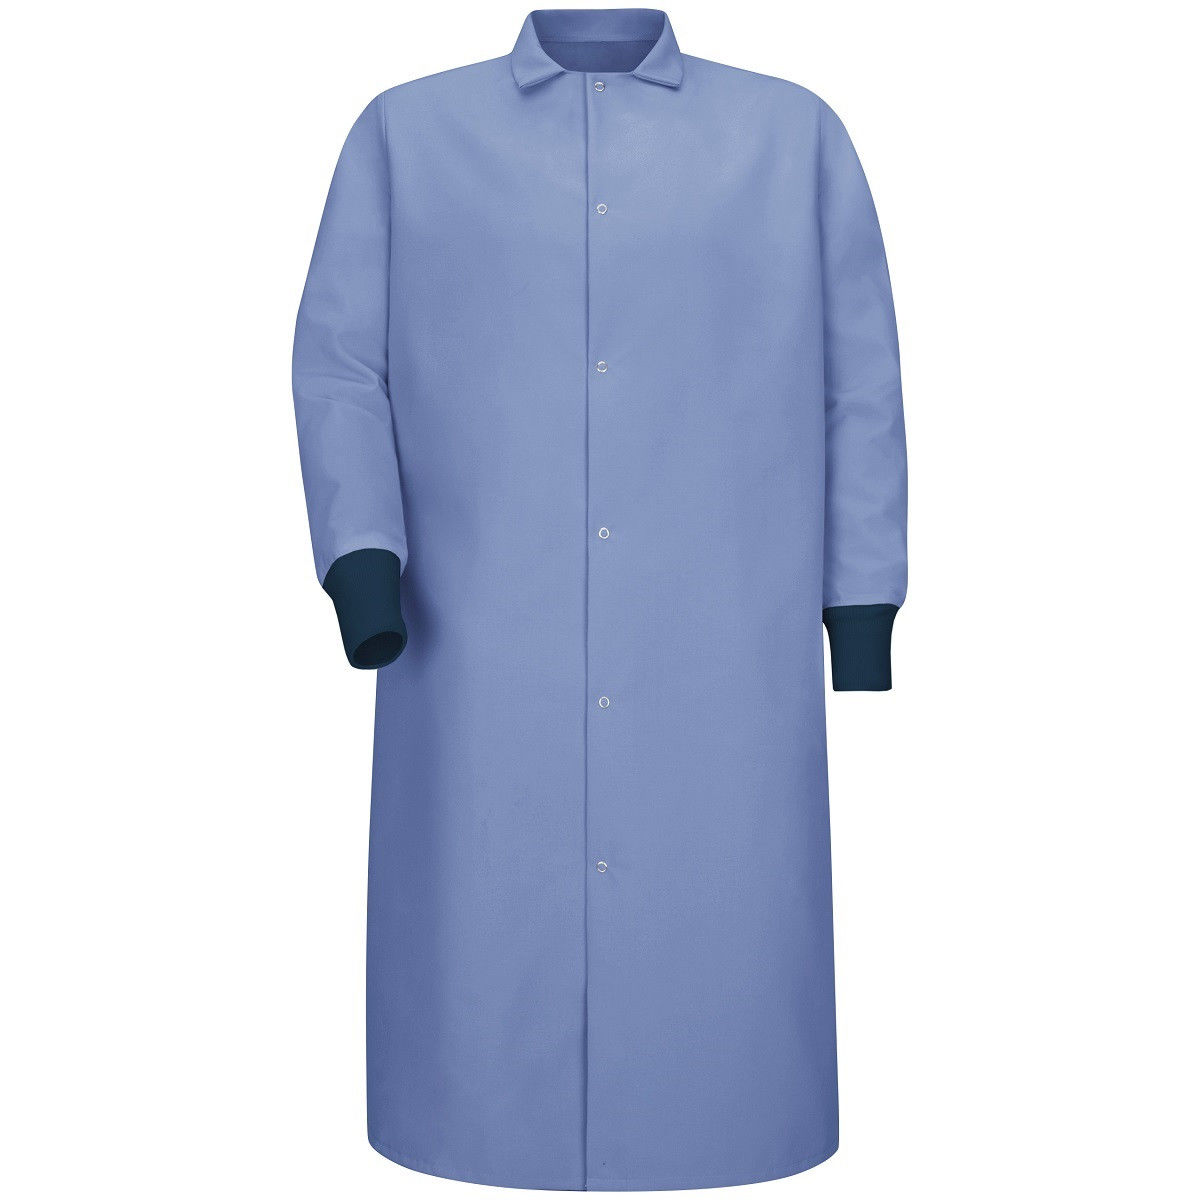 What type of fabric and color is the Red Kap KS60LB butcher coat?